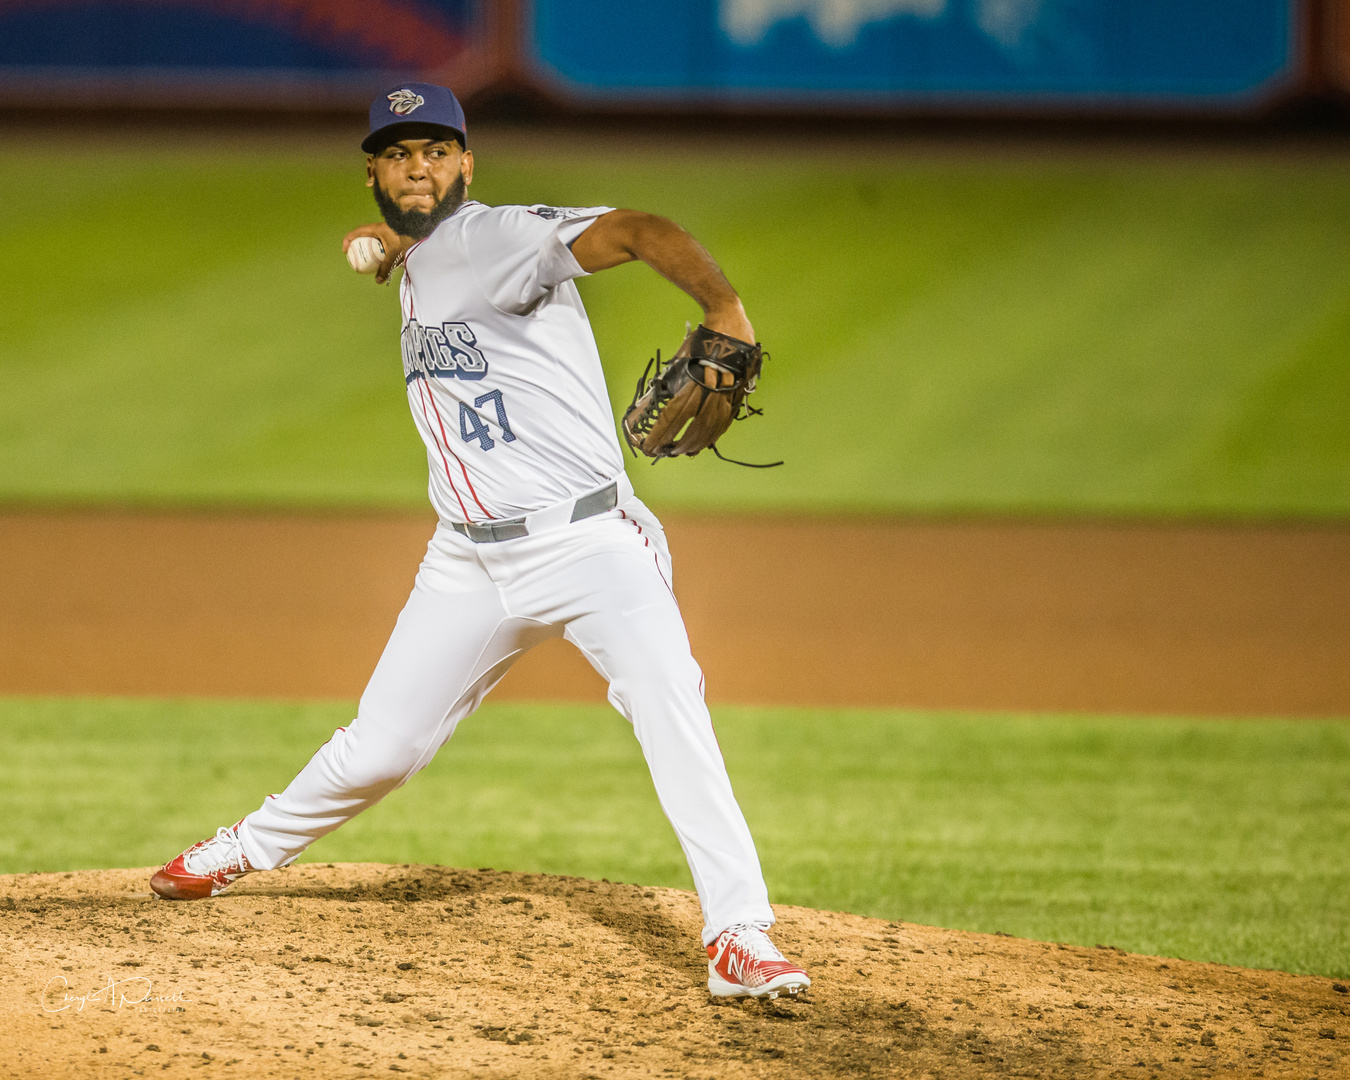 Phillies: Seranthony Dominguez makes rehab appearance for IronPigs